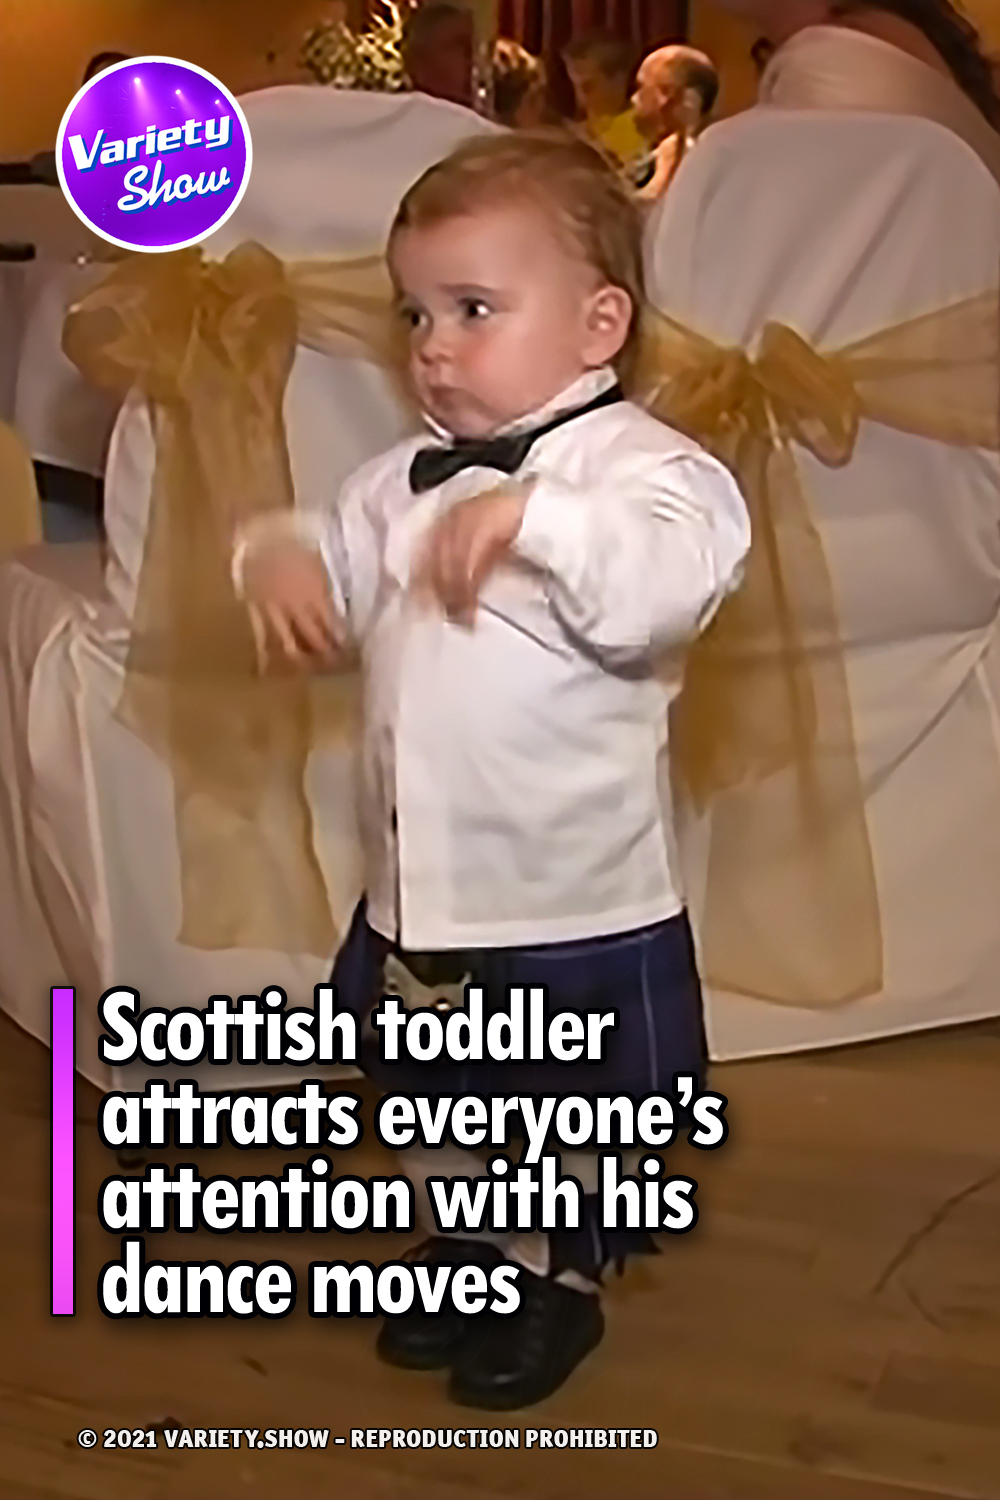 Scottish toddler attracts everyone’s attention with his dance moves